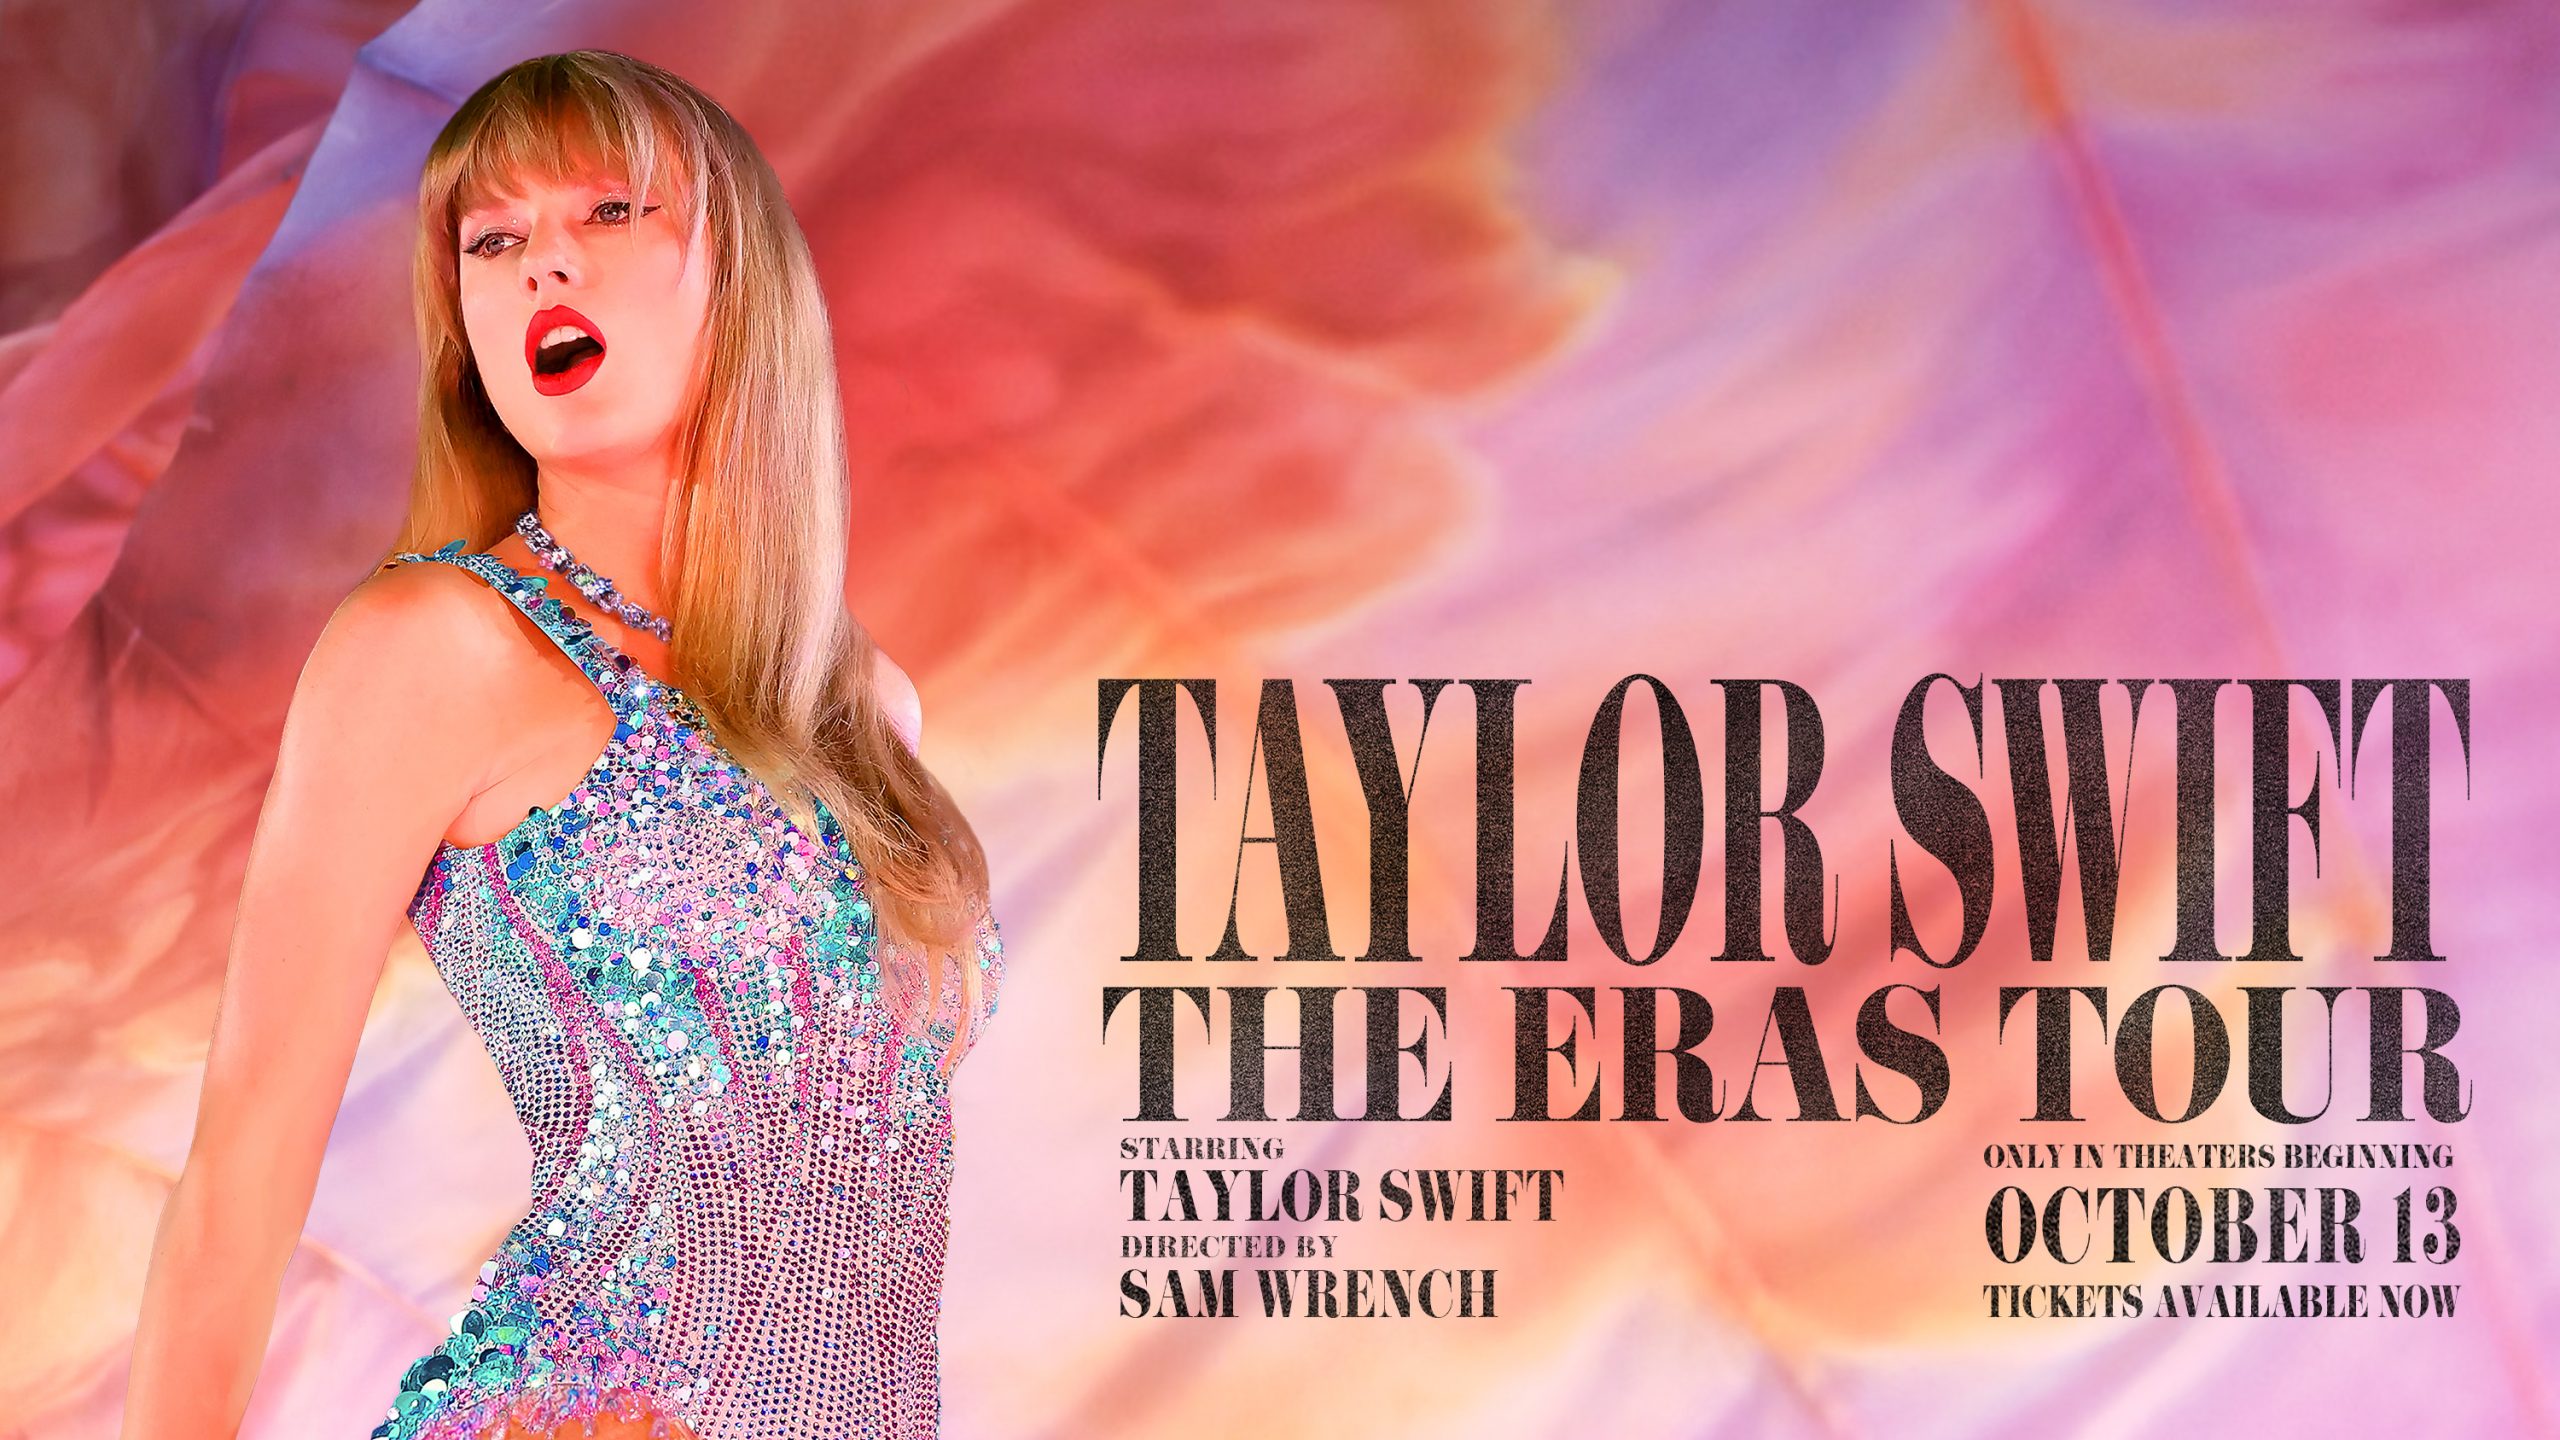 Taylor Swift: The Eras Tour – Key Art featuring Taylor Swift posing in front of a pink hued background